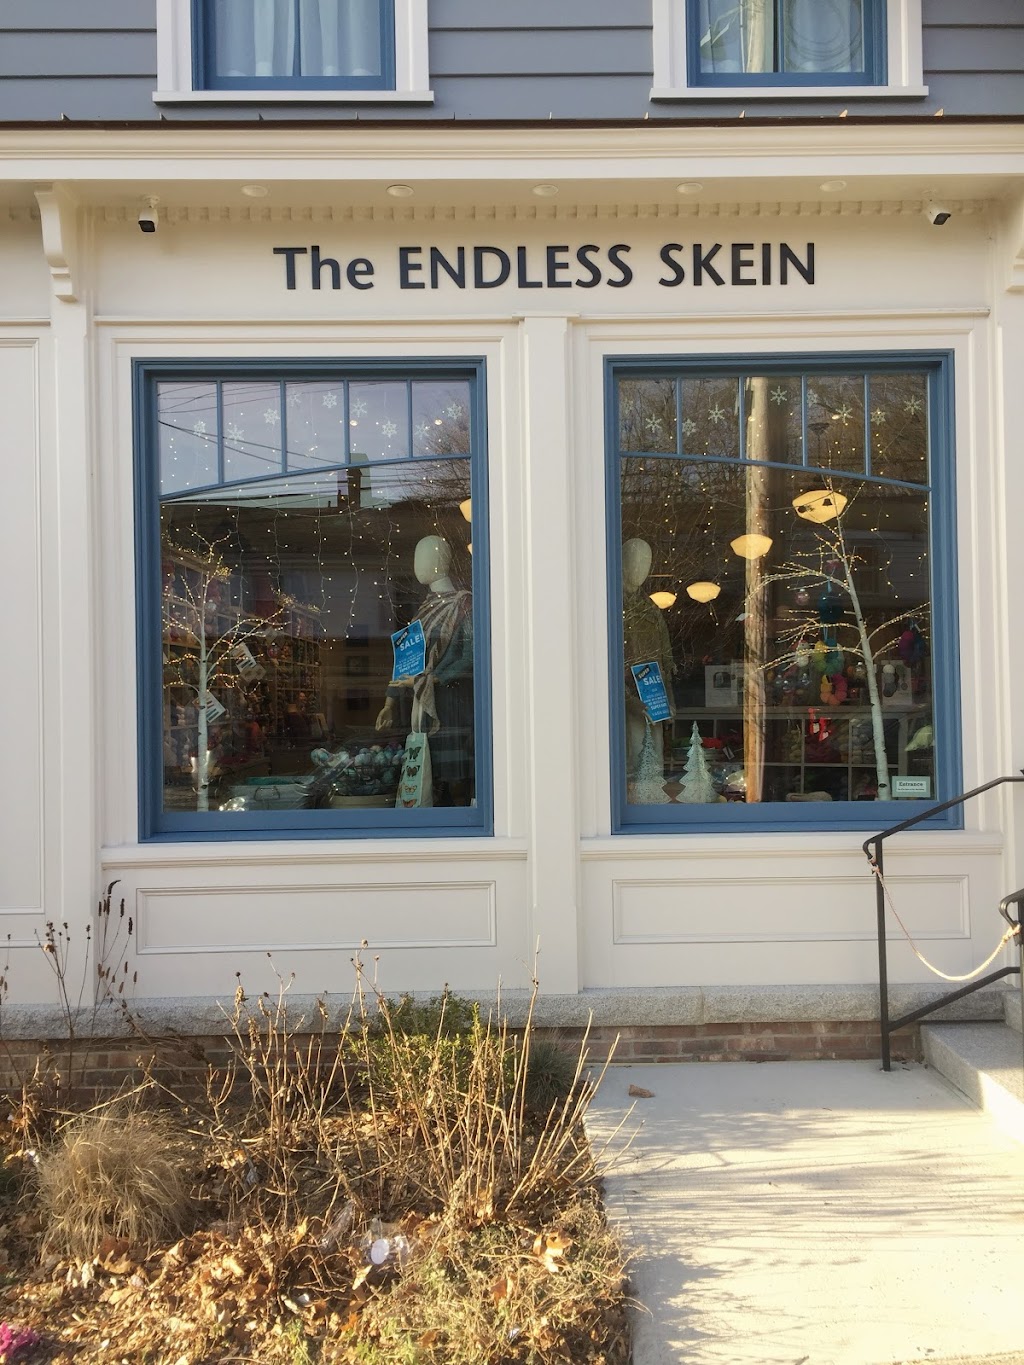 The Endless Skein | 126 Main St, Cold Spring, NY 10516, USA | Phone: (845) 809-5500